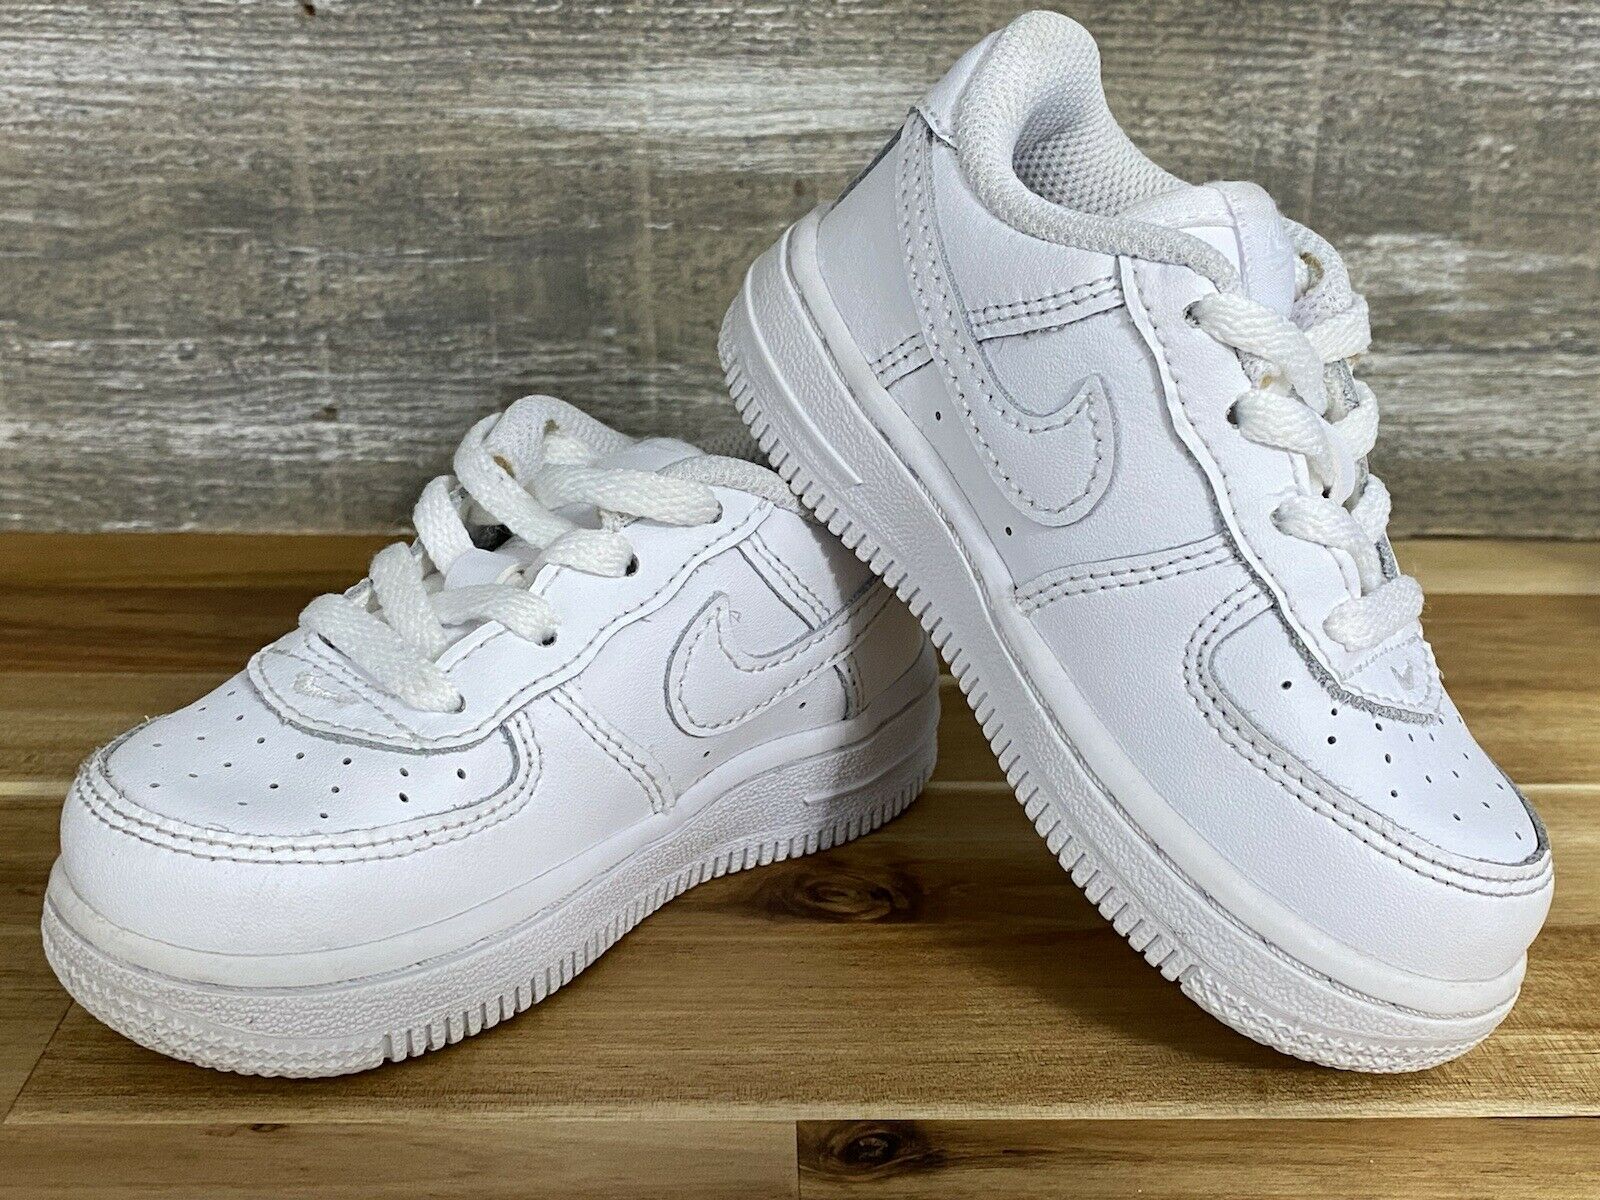 ✅Nike Air Force 1 Low (TD) Triple White Shoes 314194-117 Toddlers ✅Size 6C Kids